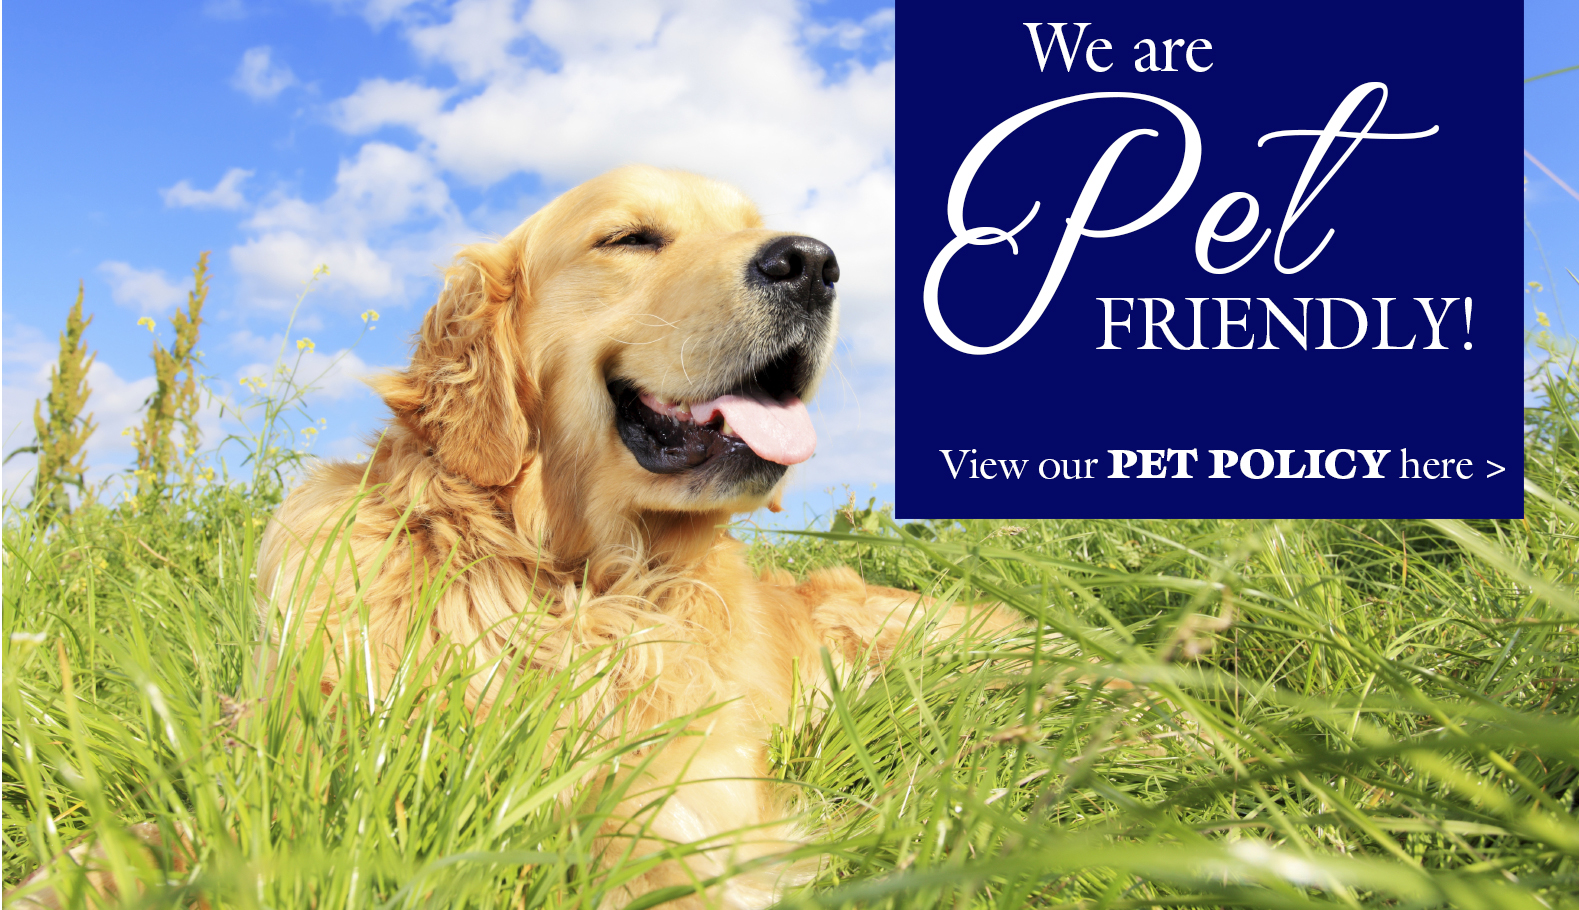 Sunny Brook Cottages is Pet Friendly!